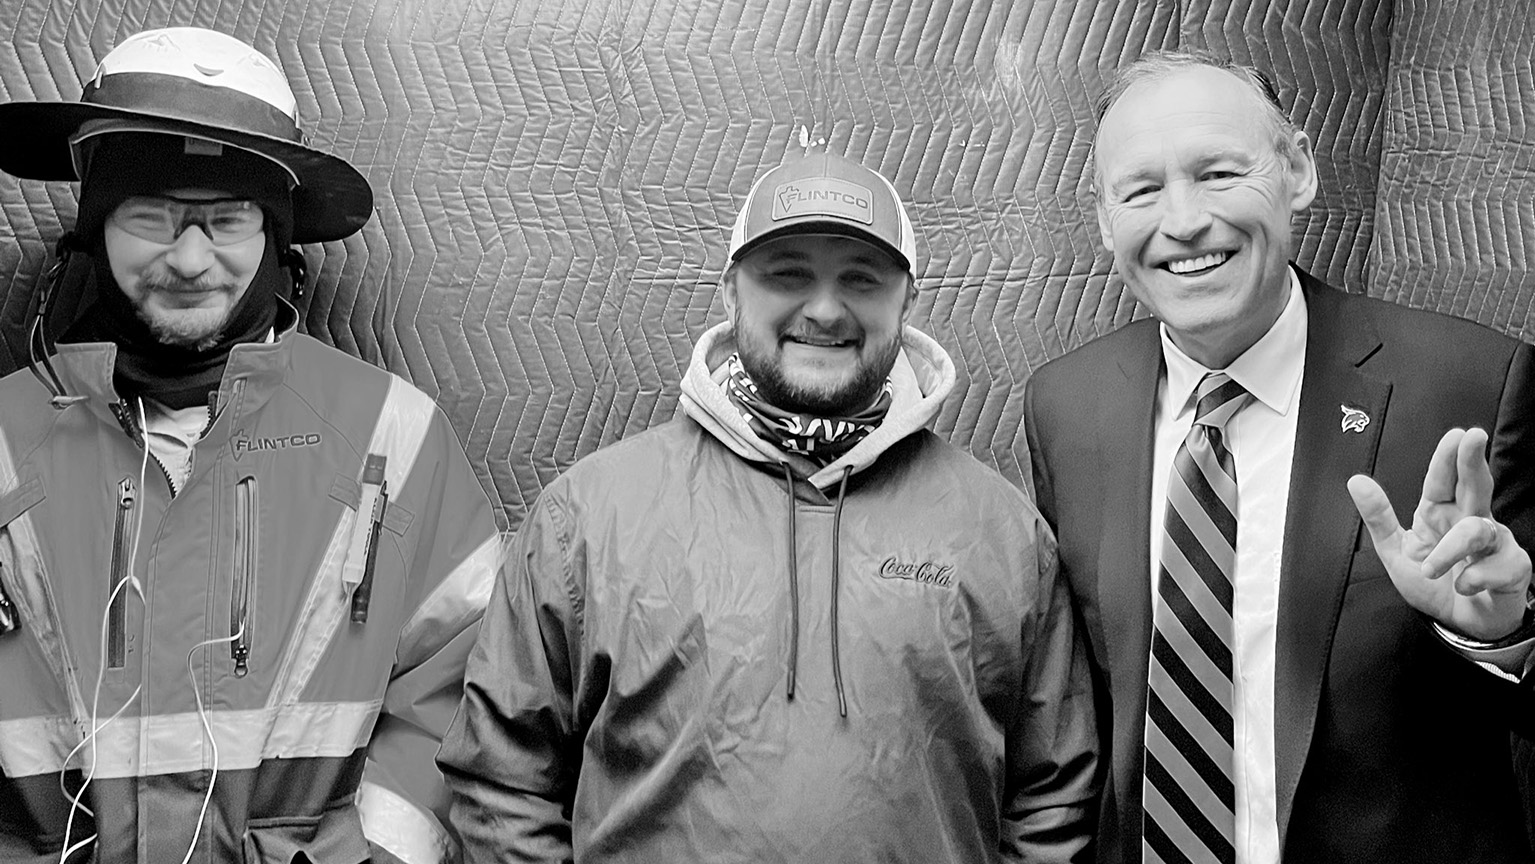 Two construction workers pose for a photo with President Damphousse, right.